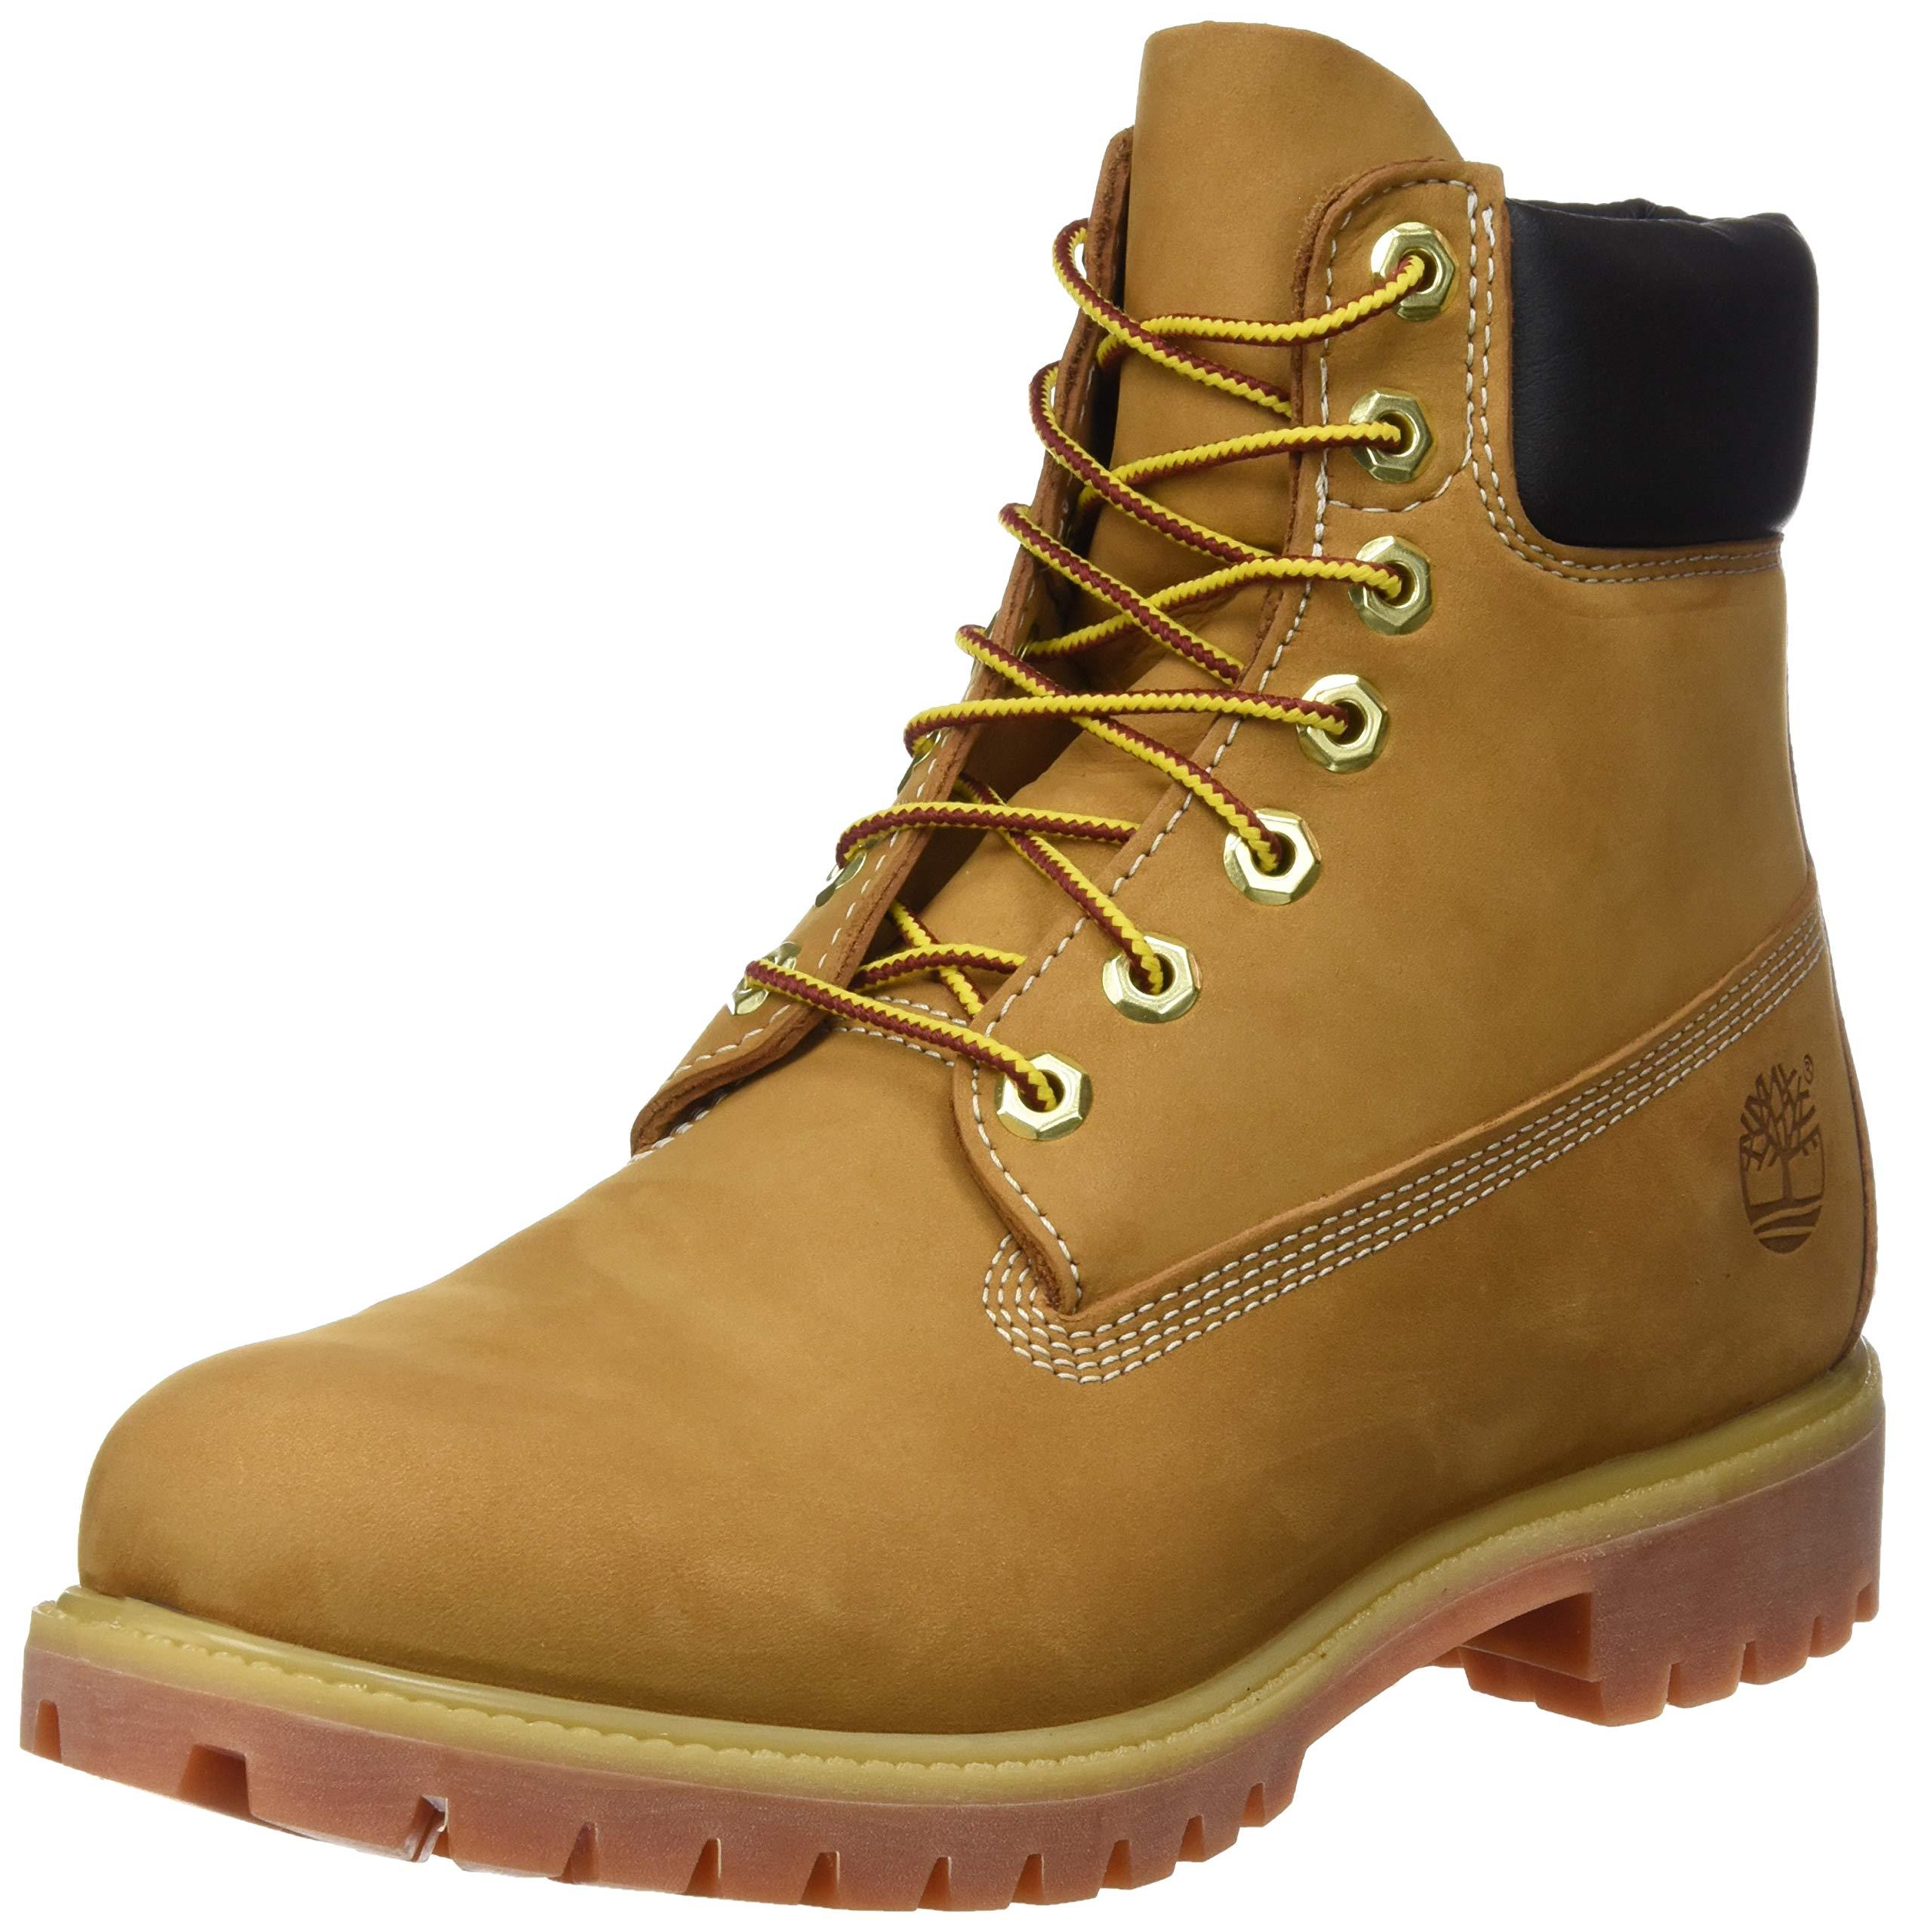 Premium 6 Inch Boot For Men In Yellow Sweden, SAVE 60% - aveclumiere.com